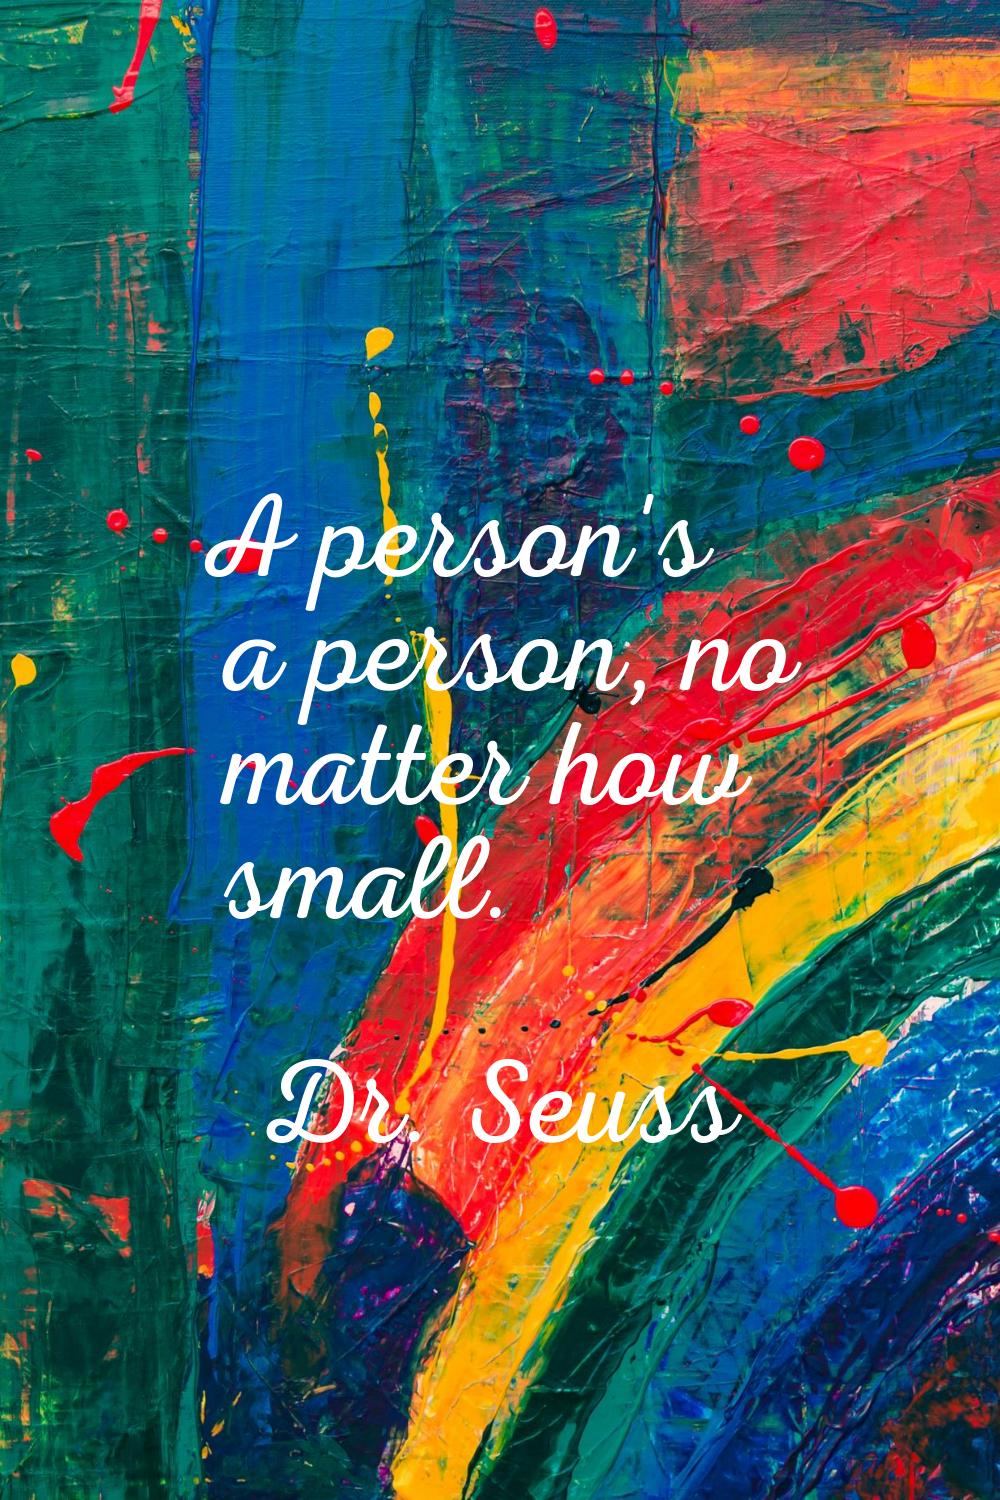 A person's a person, no matter how small.